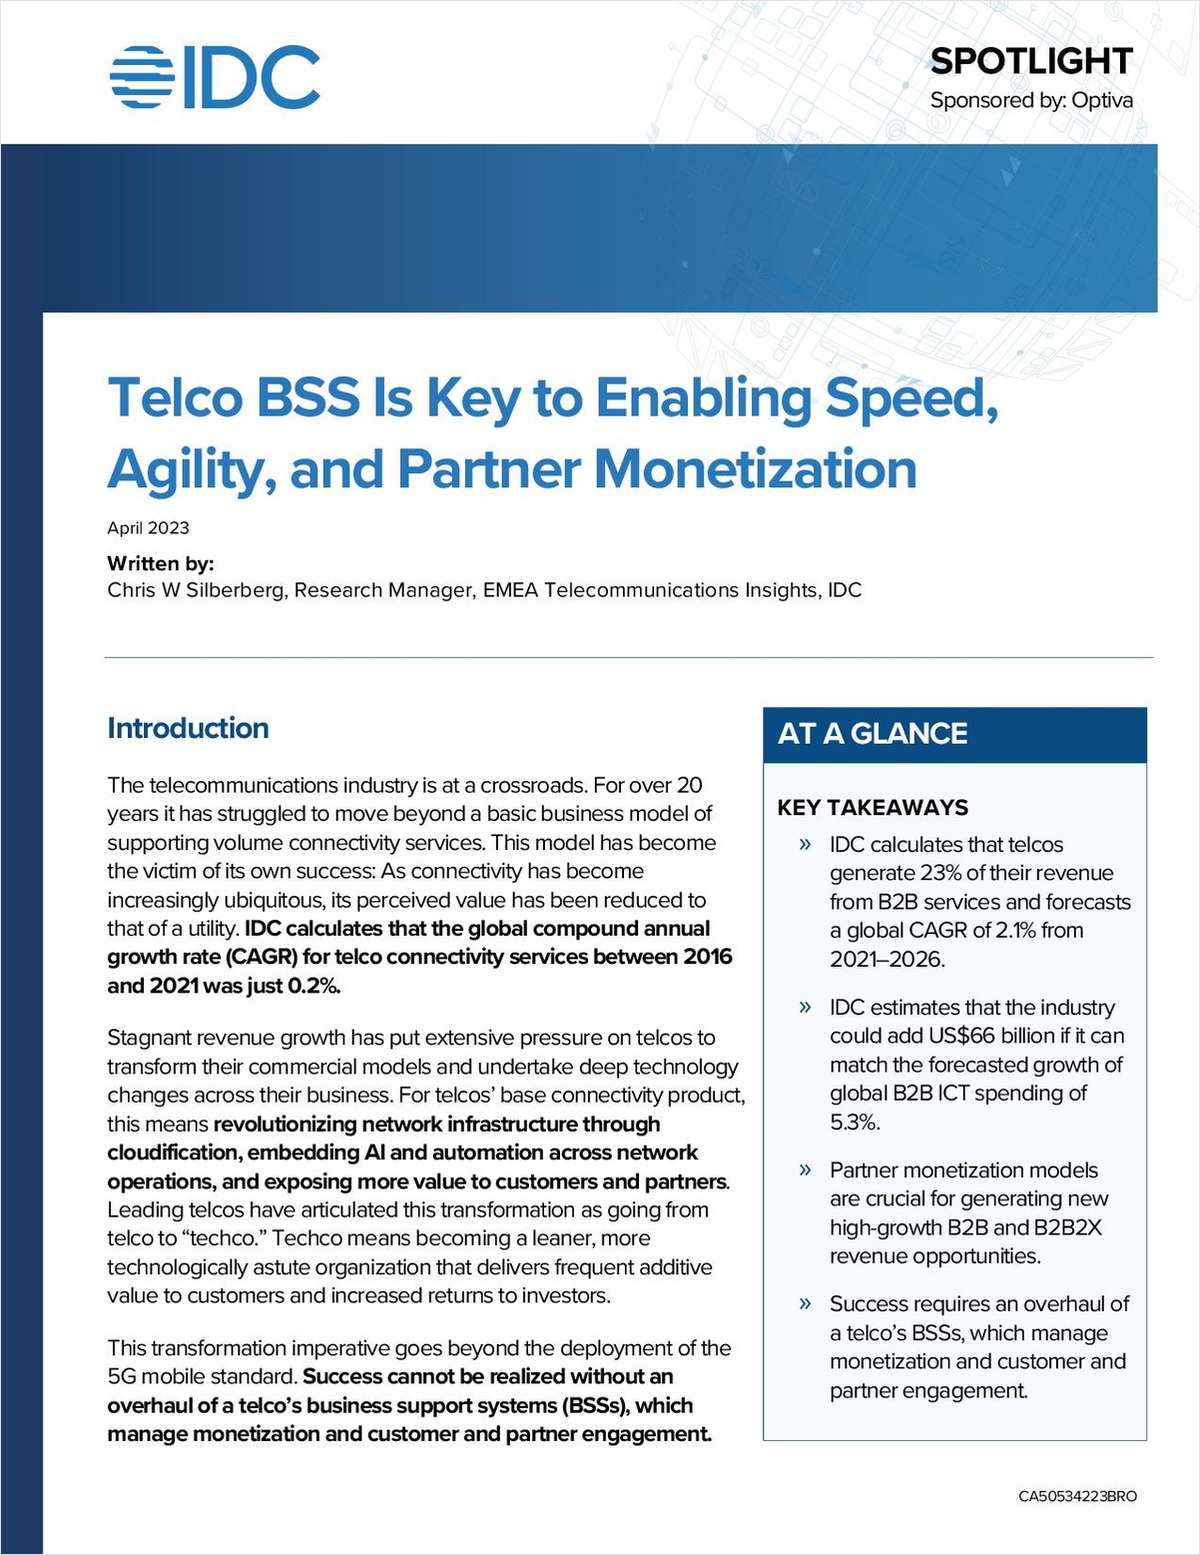 IDC Spotlight Whitepaper: Telco BSS is key to enabling speed, agility, and partner monetization